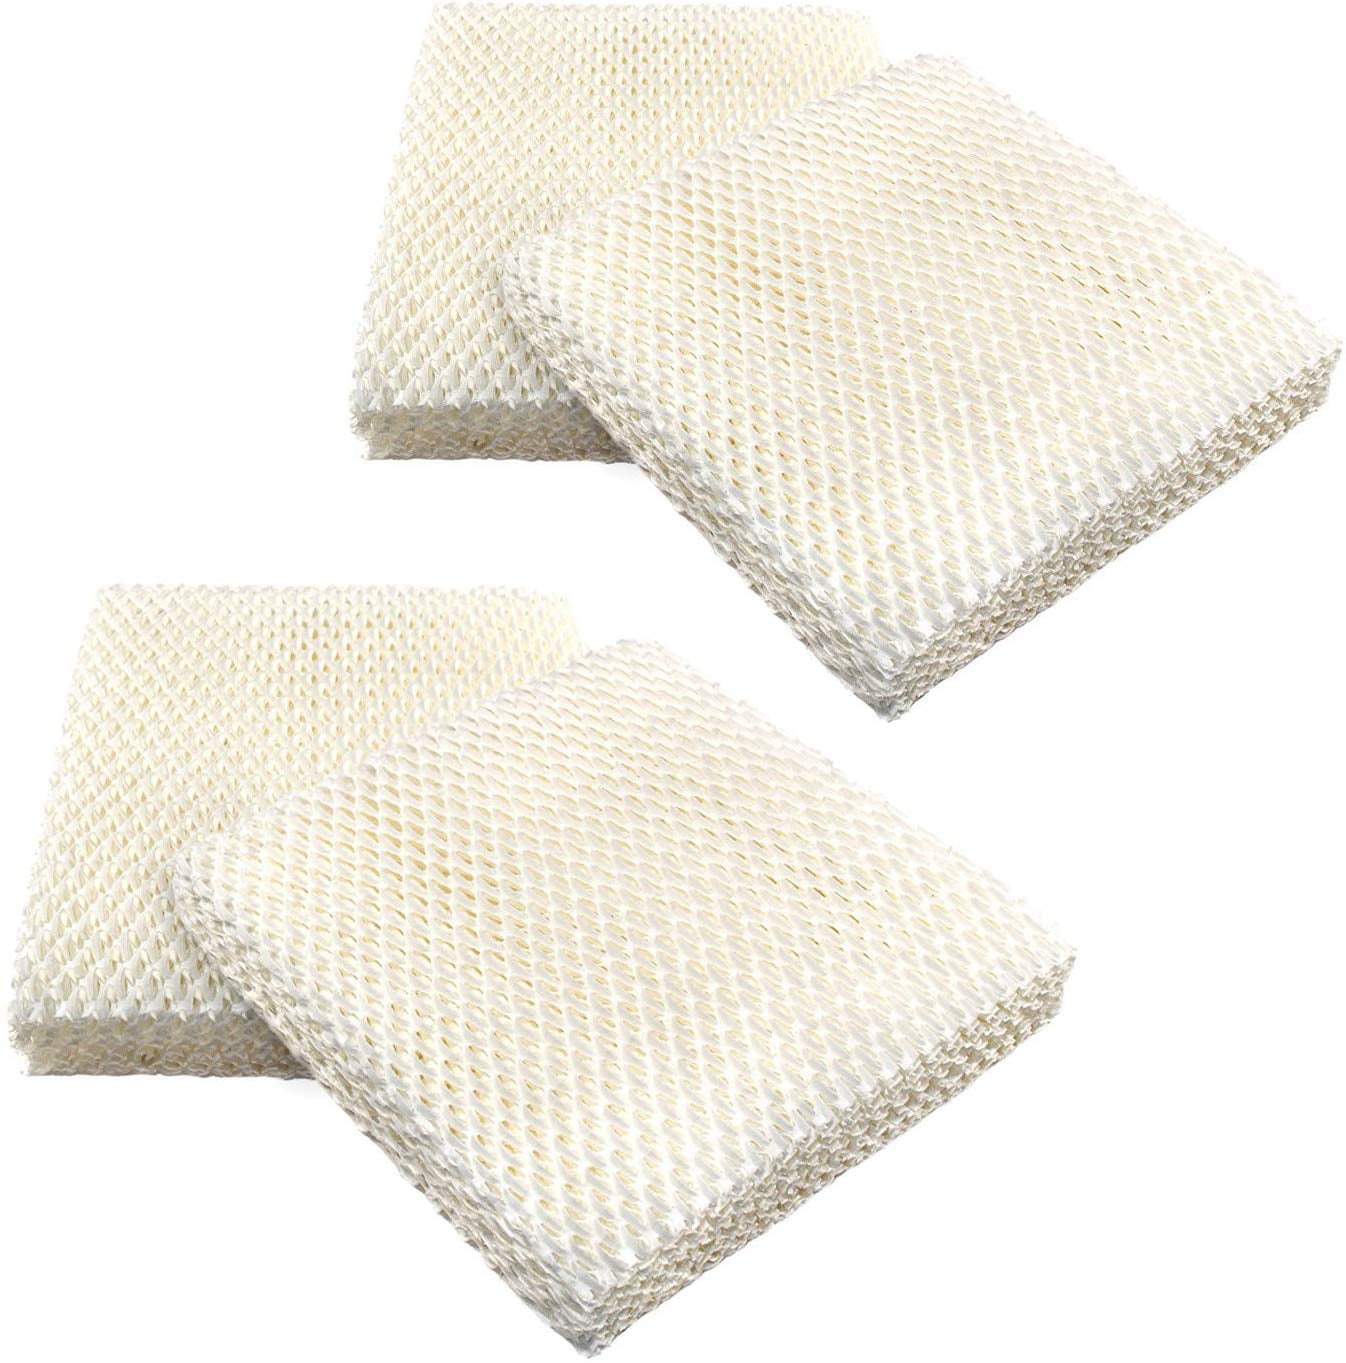 Compatible with Honeywell Top Fill Humidifier Hev615 and Hev620 & HFT600PDQ Compatible with Part # HFT600 JJSS 2 Pack HFT600 Humidifier Wicking Filter T HFT600T